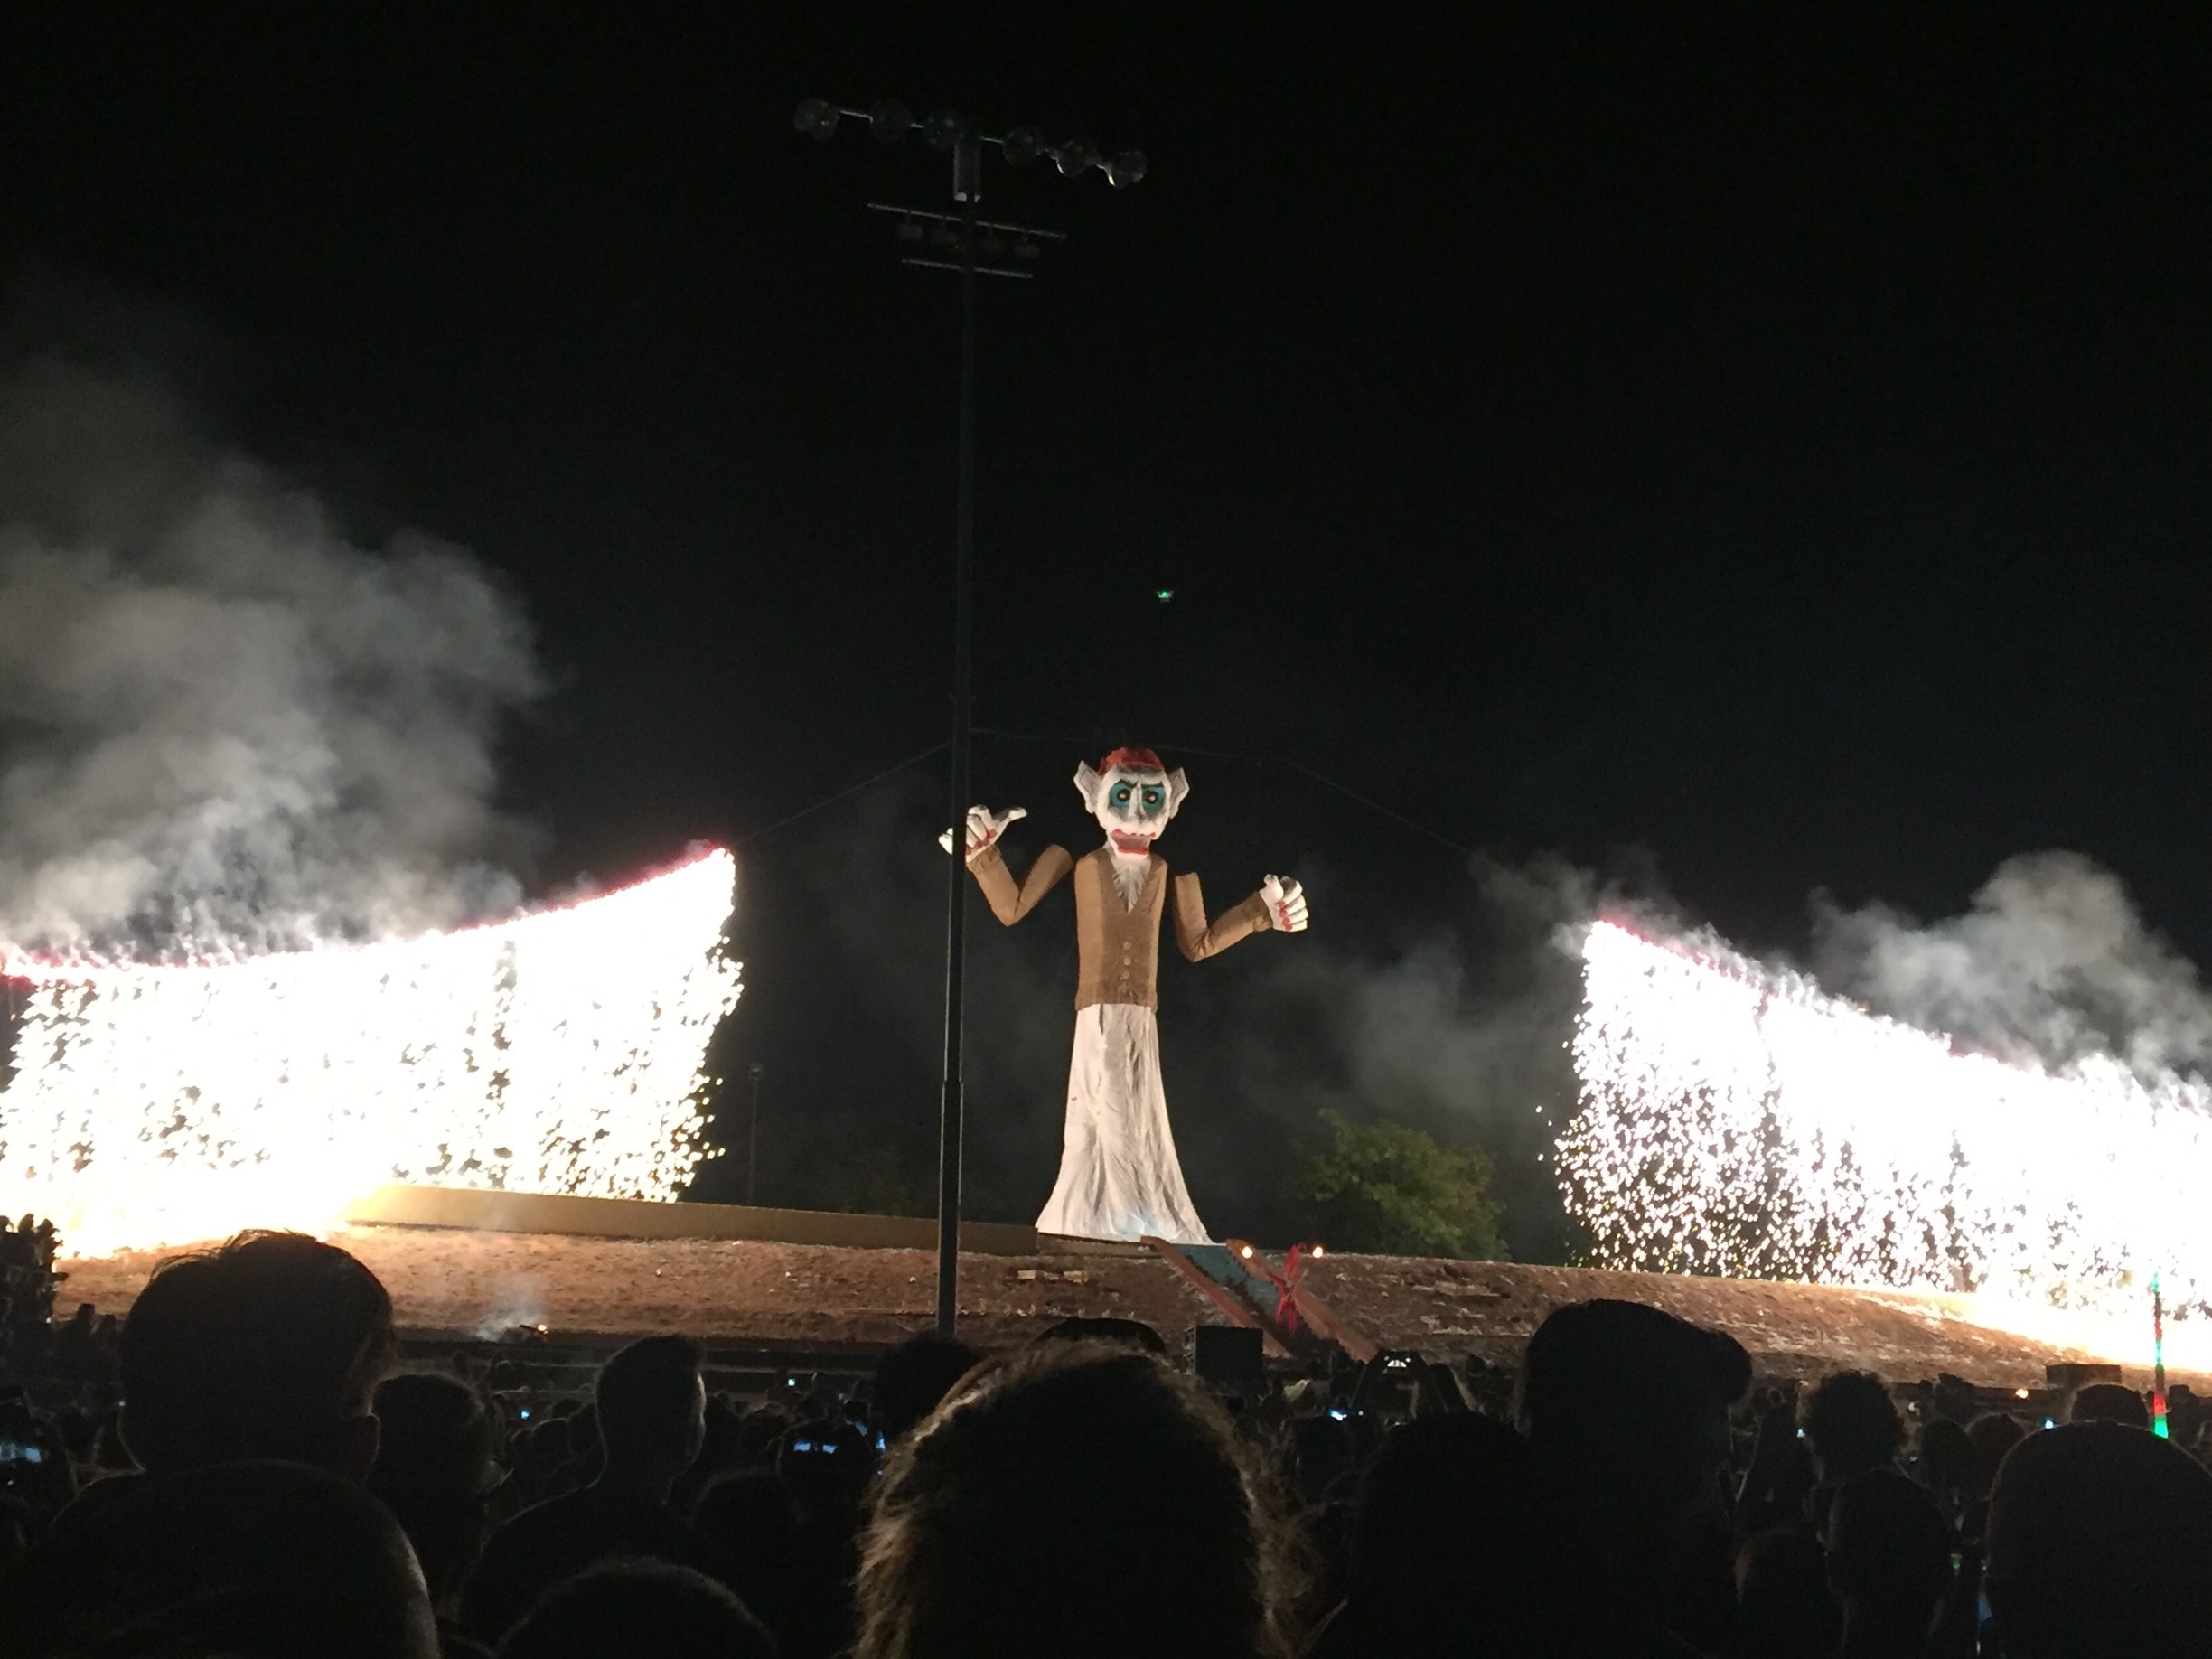 The annual burning of Zozobra (Old Man Gloom) is a lively Santa Fe tradition that includes live music and fireworks along with setting fire to a large paper marionette filled with scrawlings of all the bad that people wish to leave behind. 